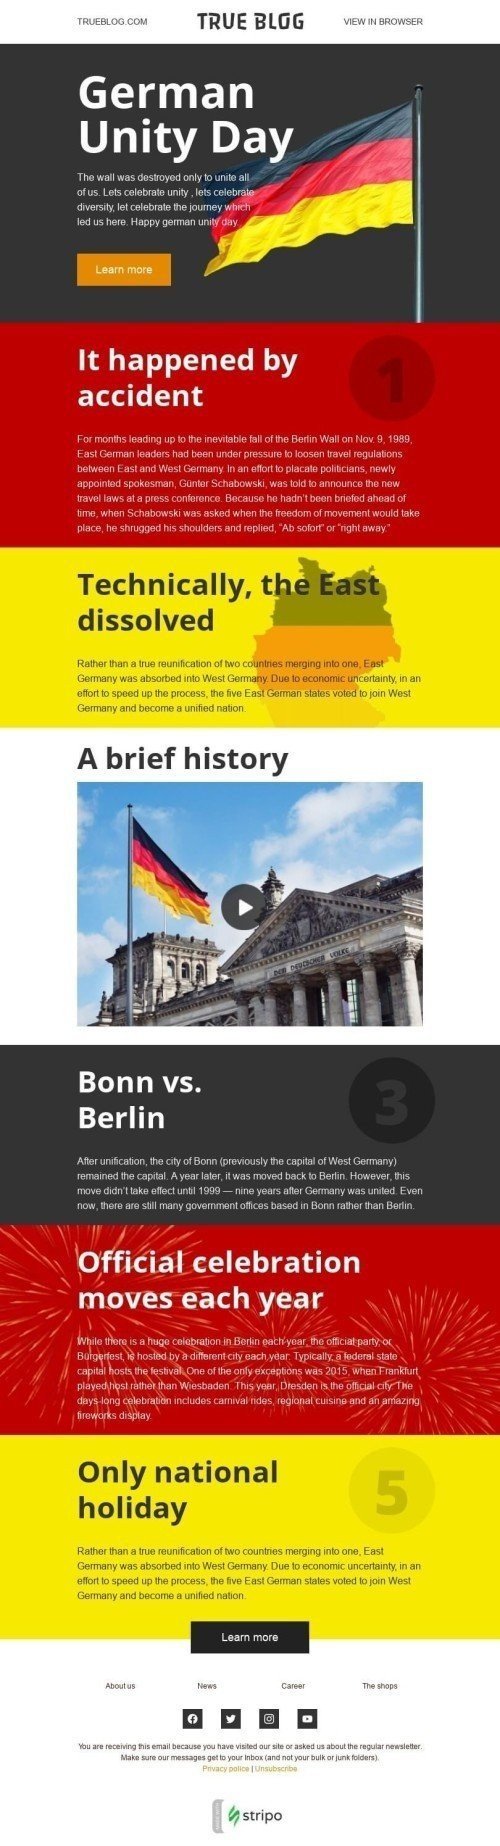 German Unity Day Email Template «It happened by accident» for Publications & Blogging industry desktop view